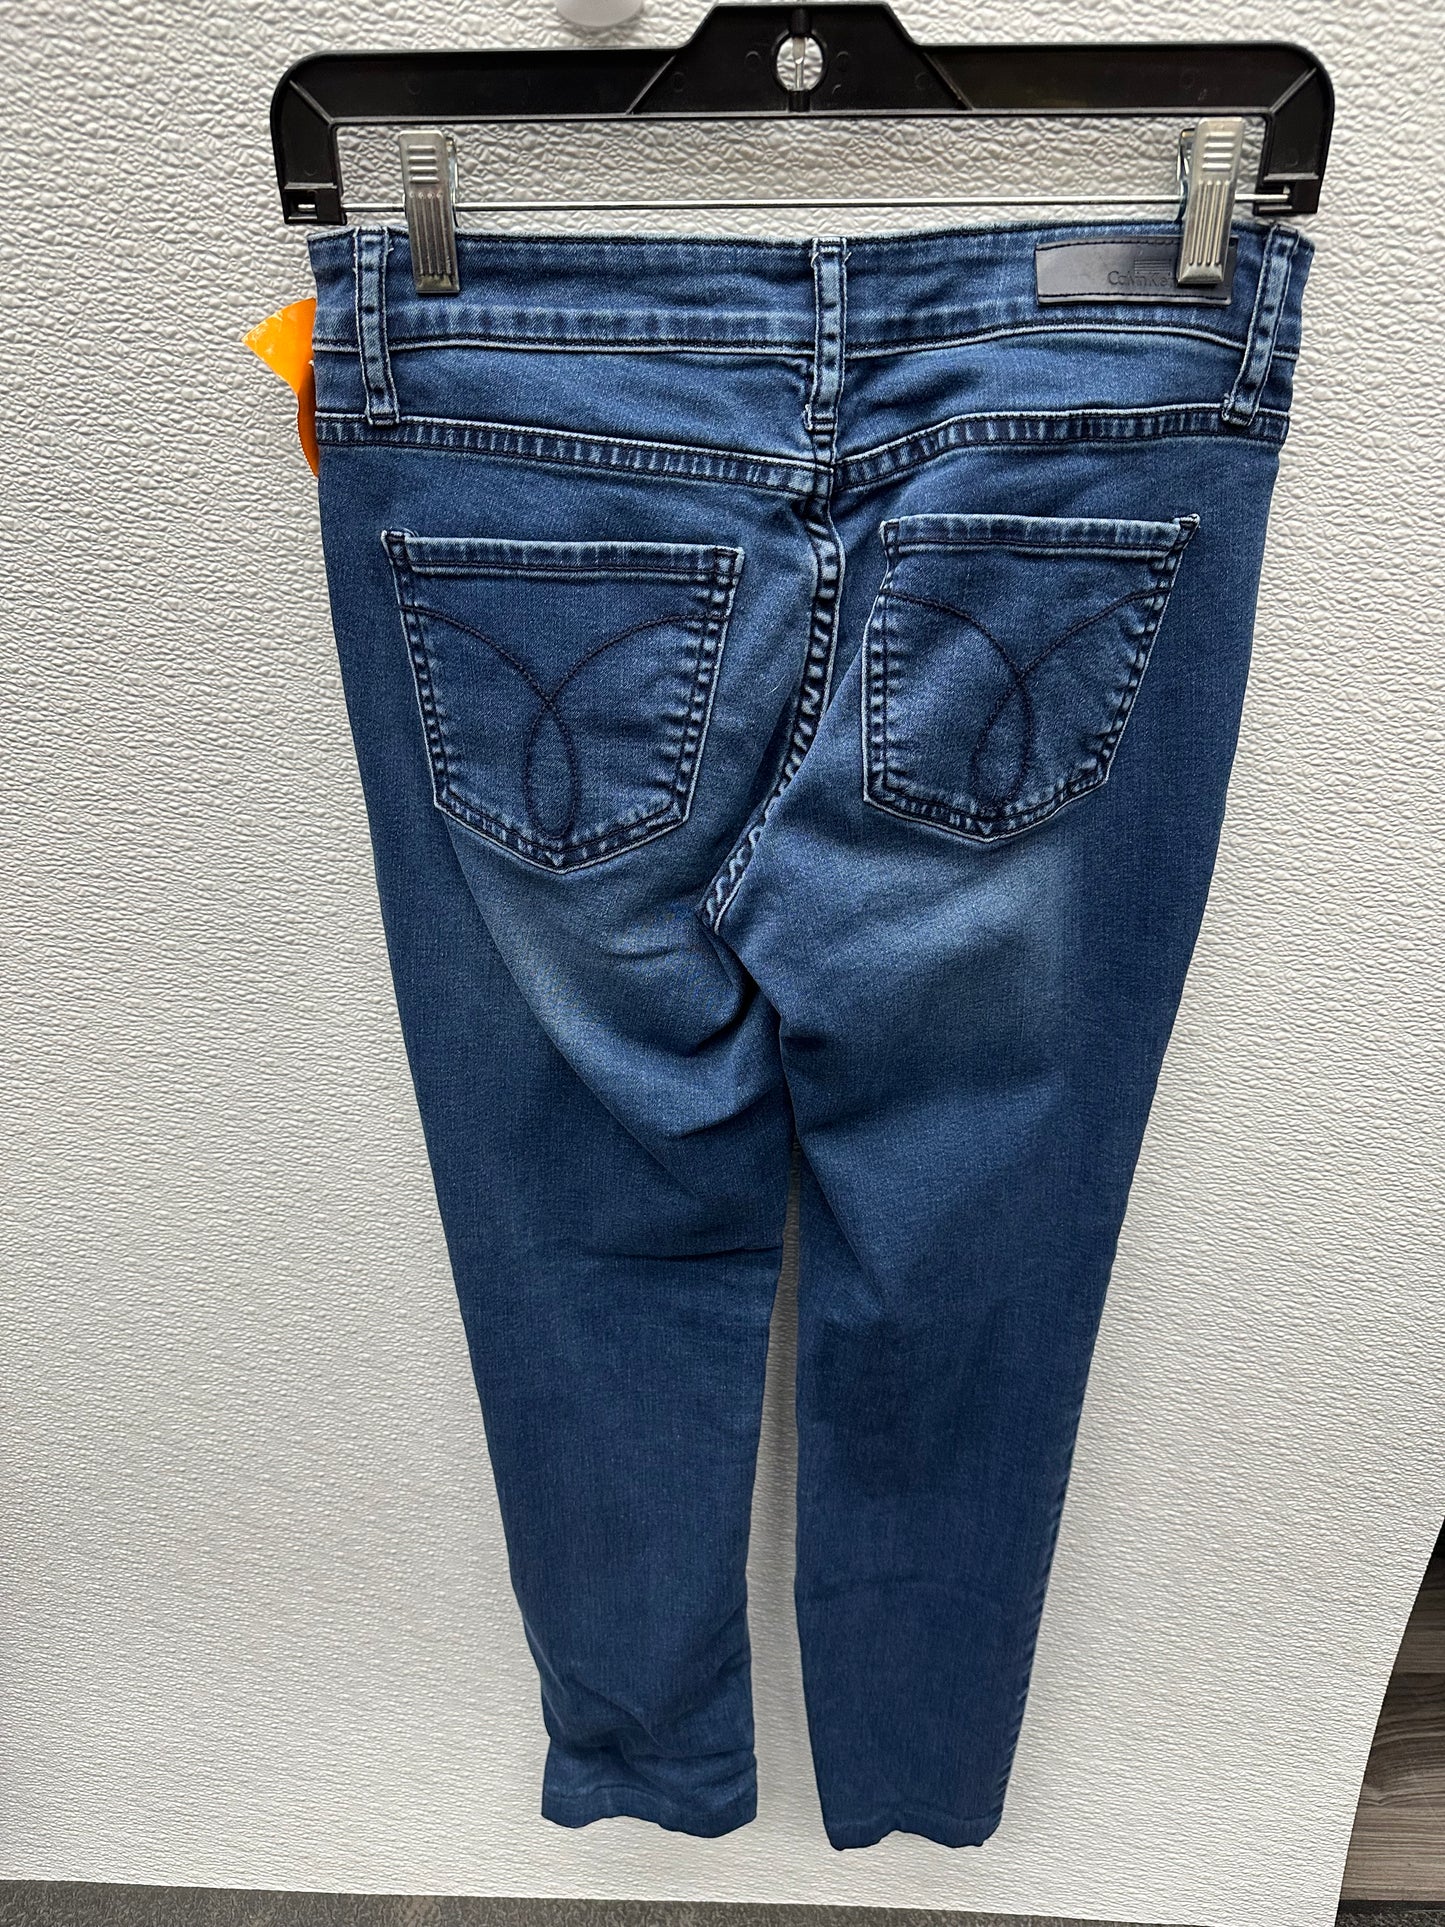 Jeans Skinny By Calvin Klein  Size: 4